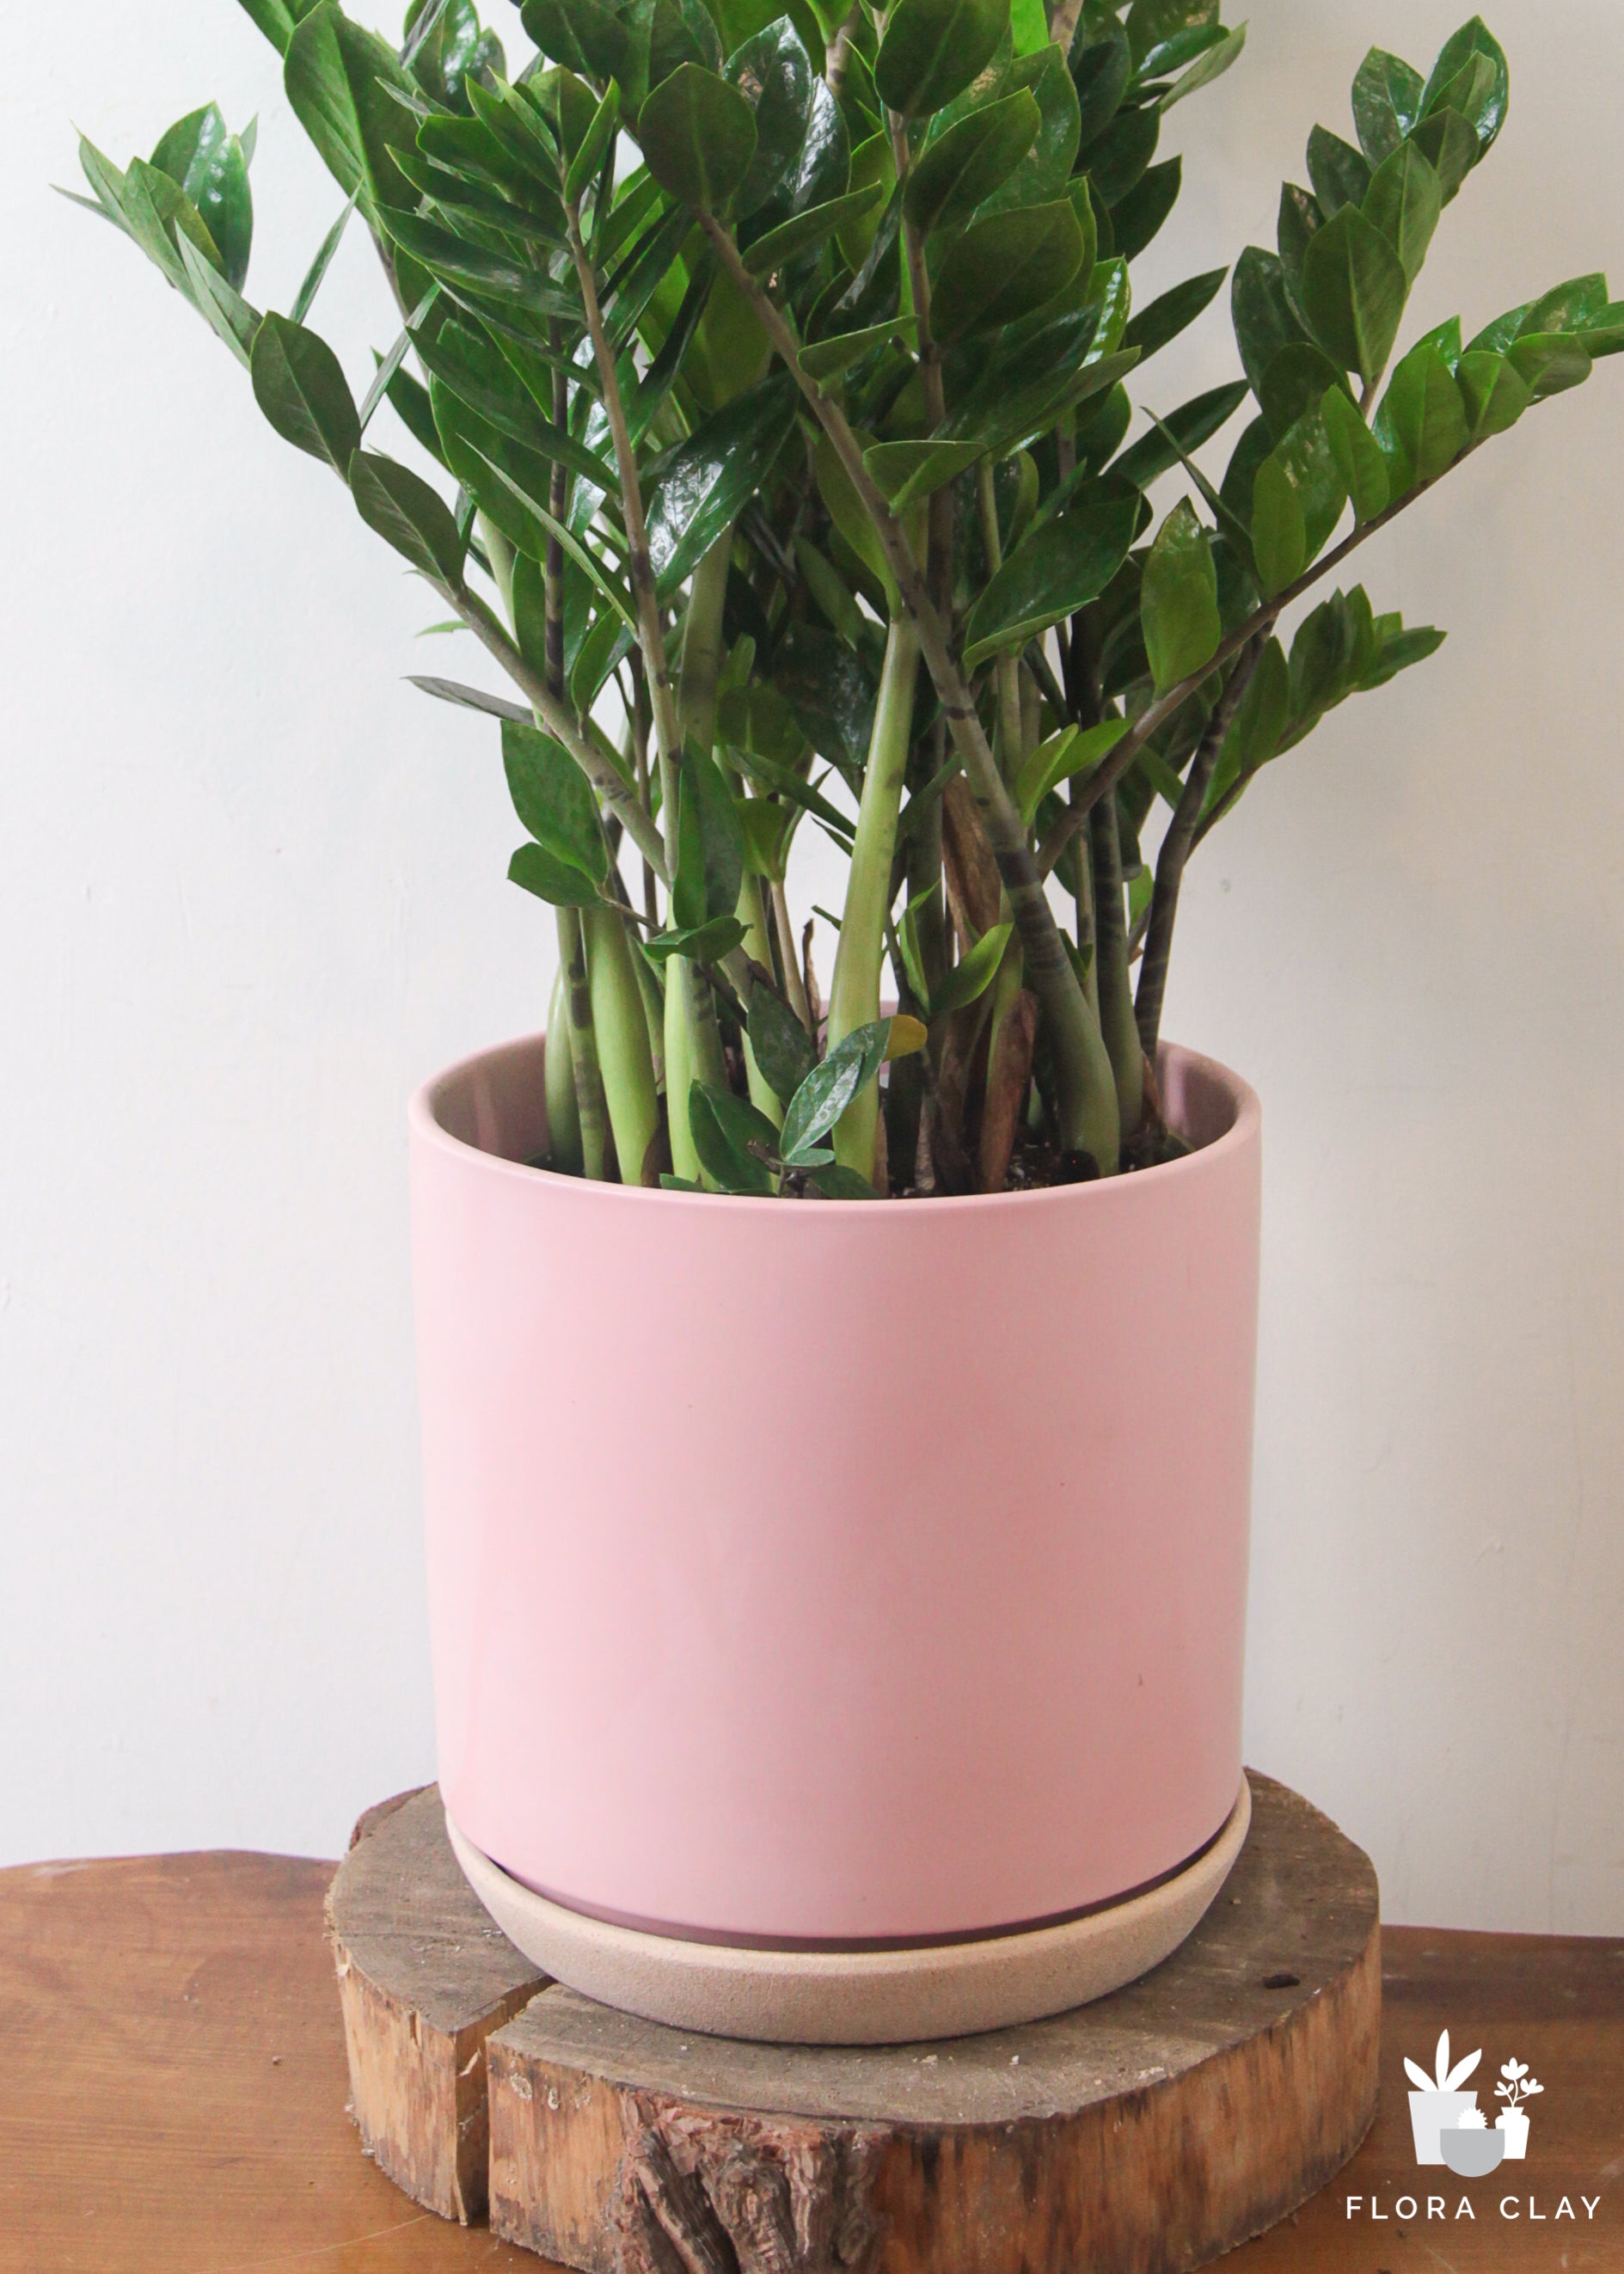 ZZ Plant Potted In Elegant Rondo Red Planter